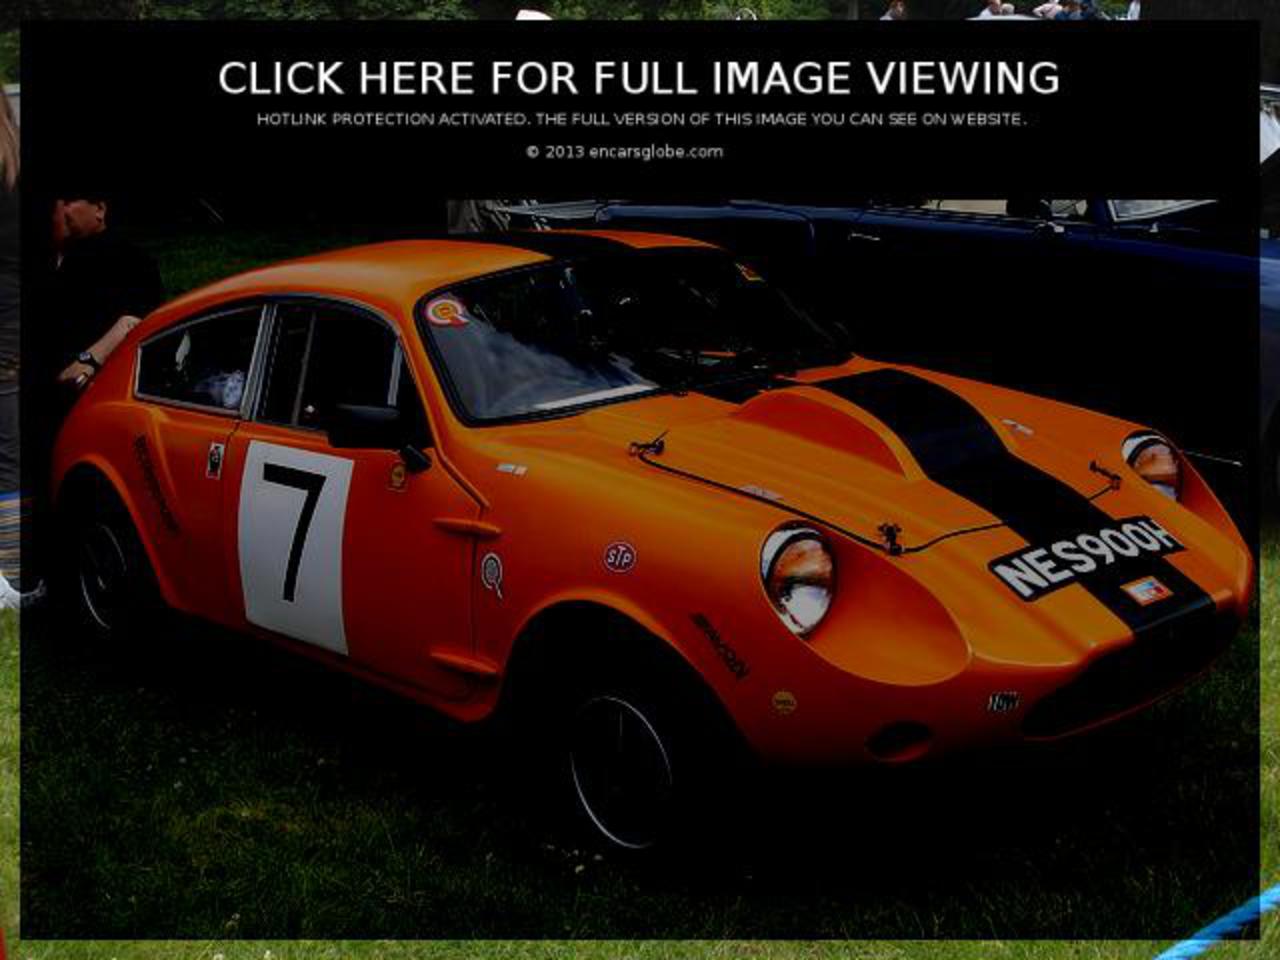 Gallery of all models of Marcos: Marcos 1600, Marcos 1600 GT ...